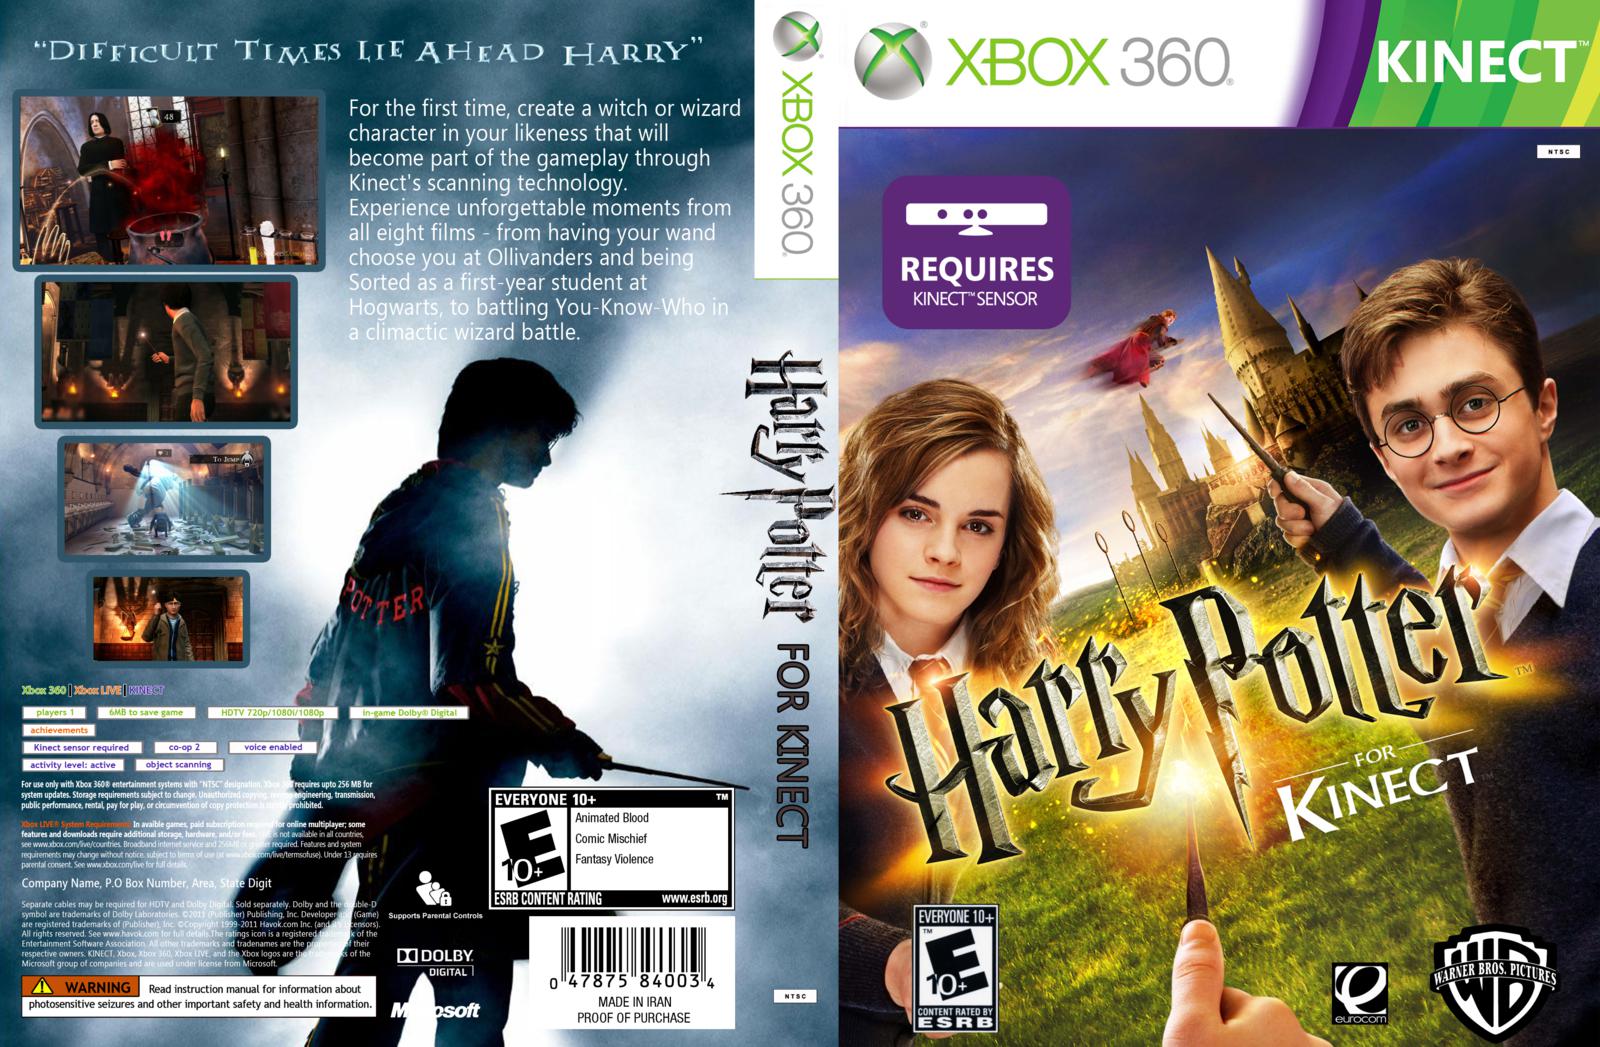 Harry Potter for Kinect full game free pc, downloa